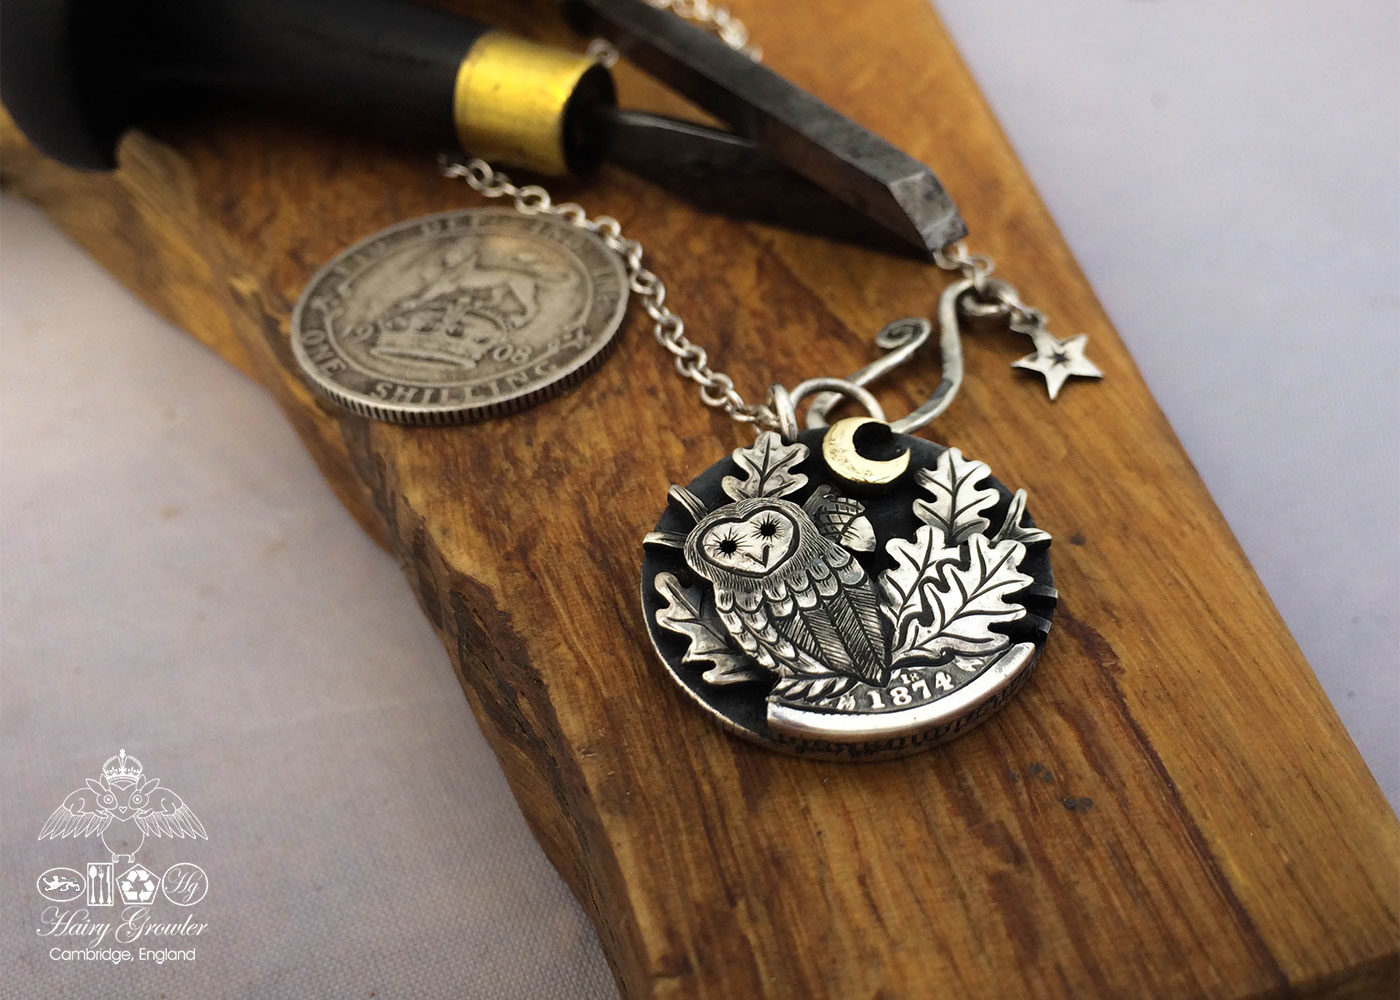 sitting in the moonlight owl necklace handcrafted and recycled from three silver shilling coins all over 100 years old